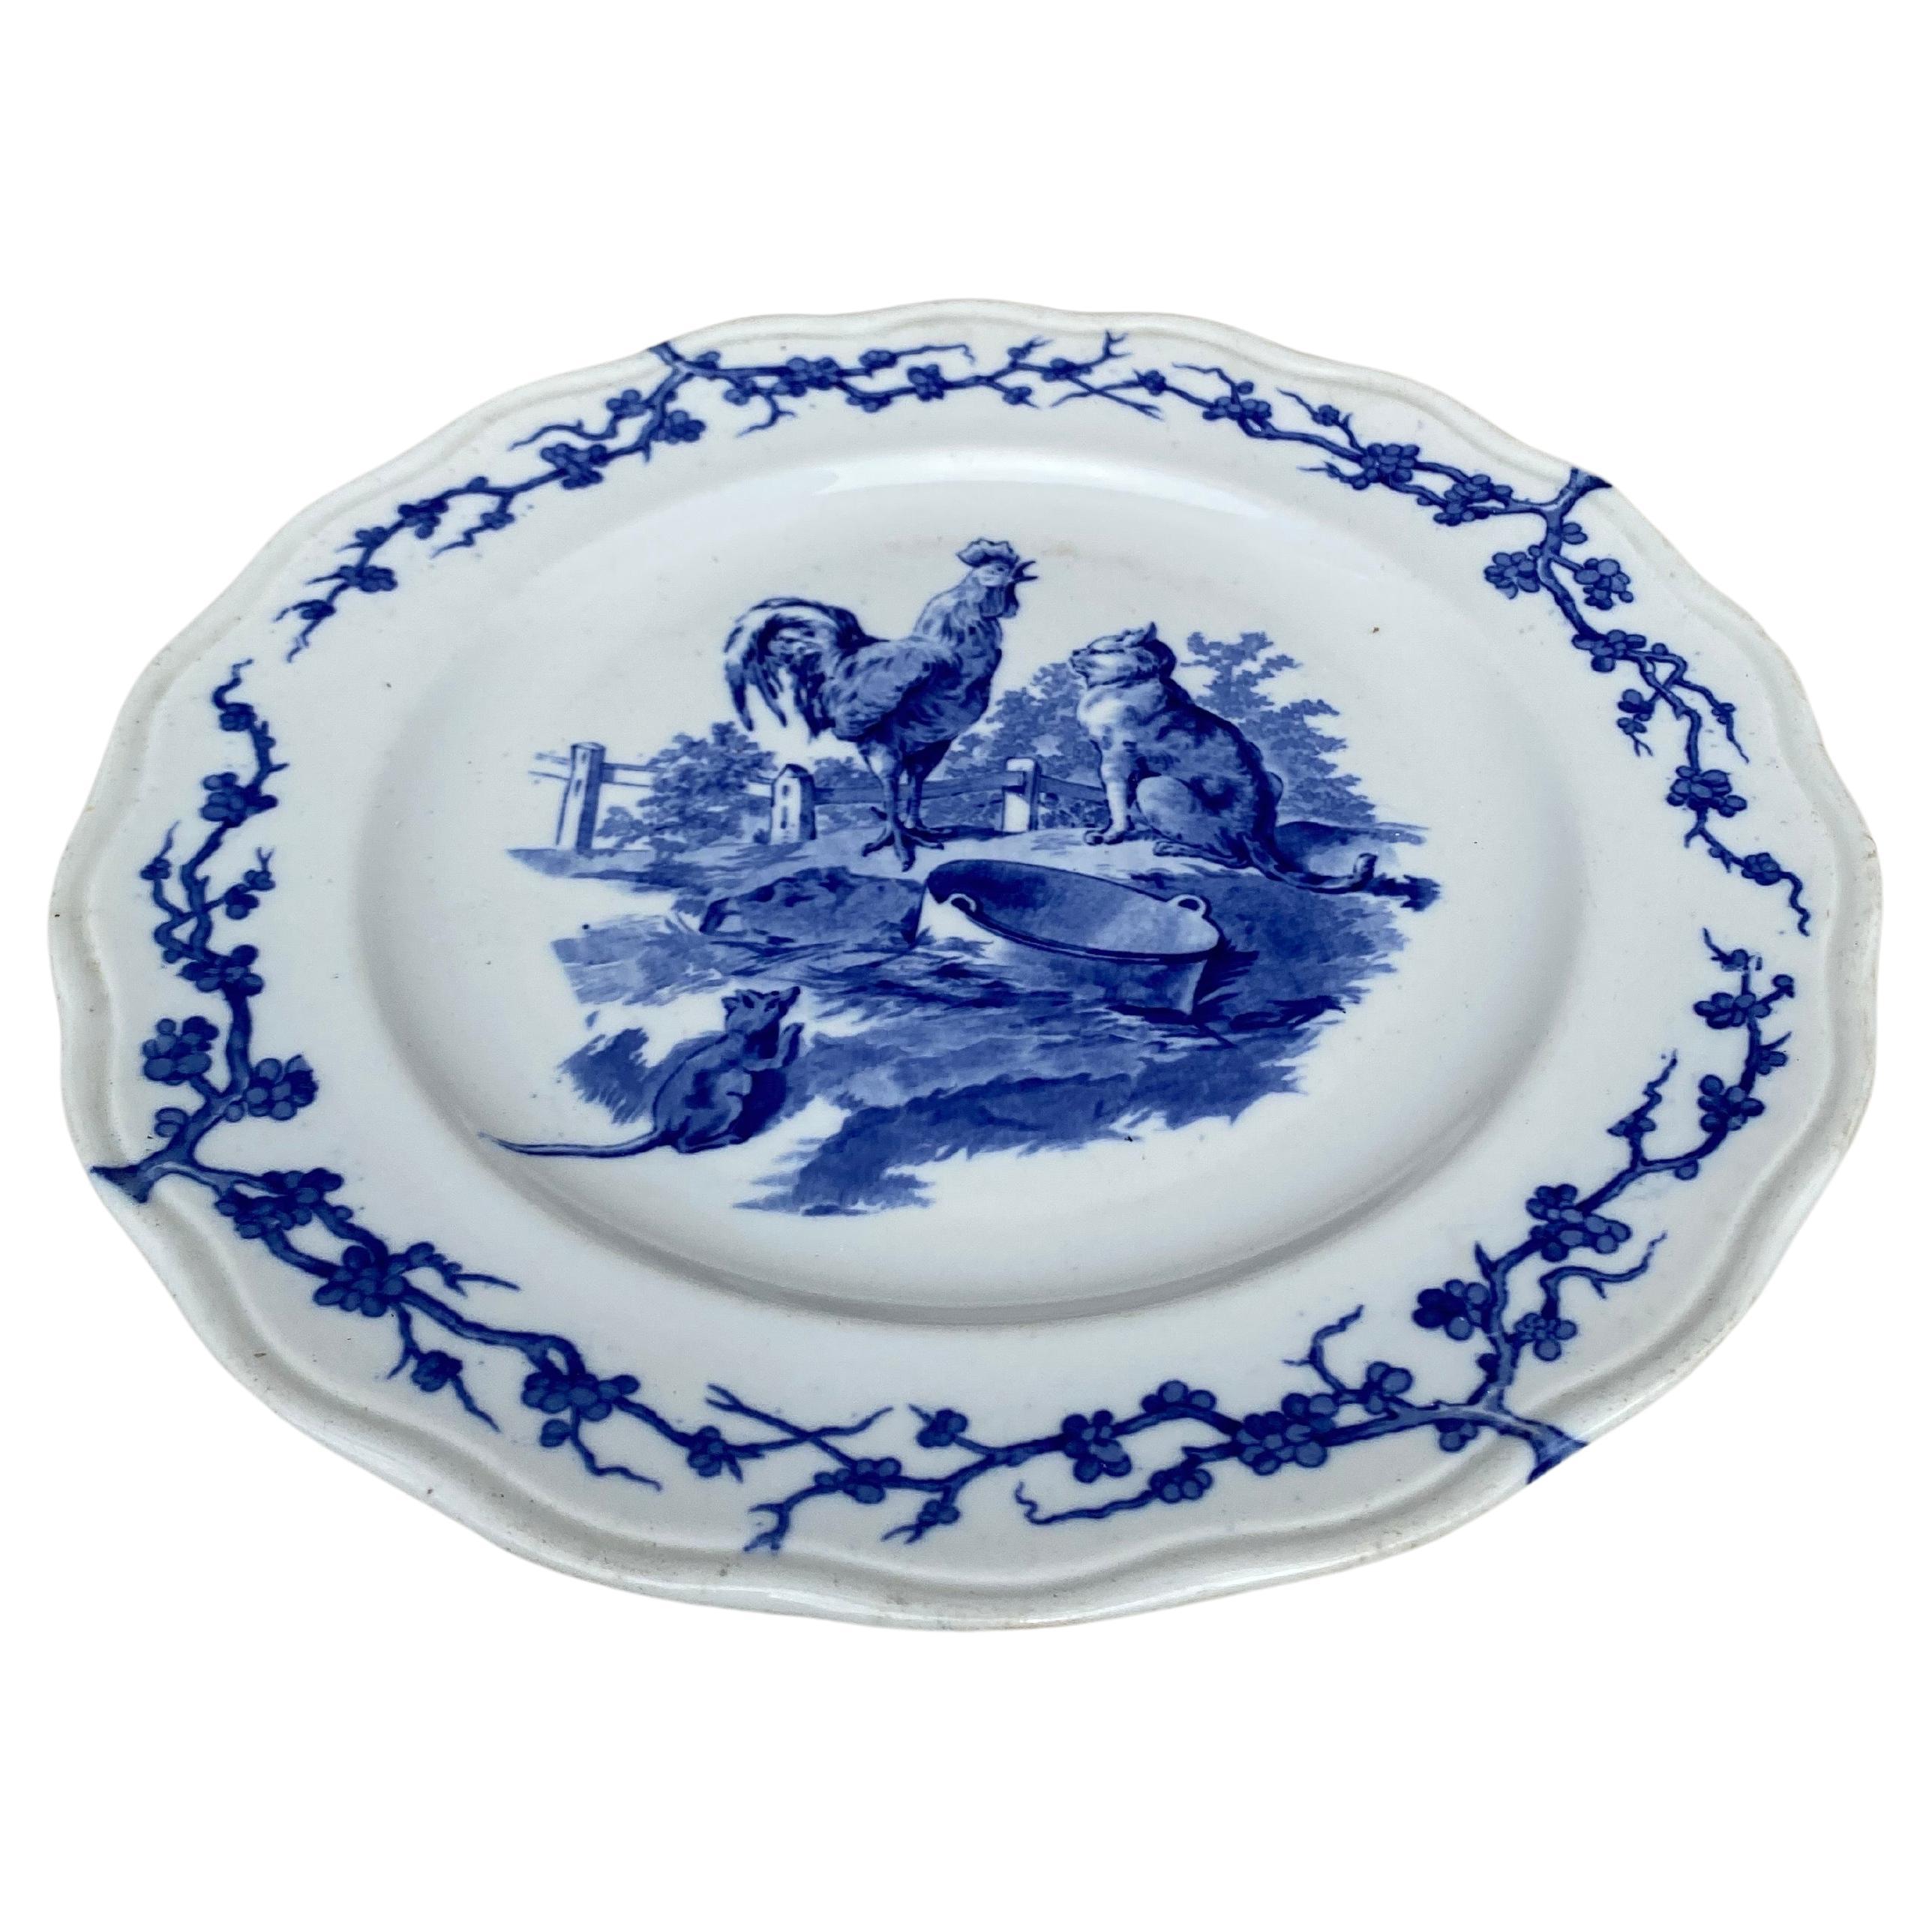 English blue & white plate rooster and cat Brown Westhead and Moore, circa 1890.
Was sold in the Grand Depot 21 rue Drouot Paris.
Fontaine / Aesops Fables
English Losange mark.